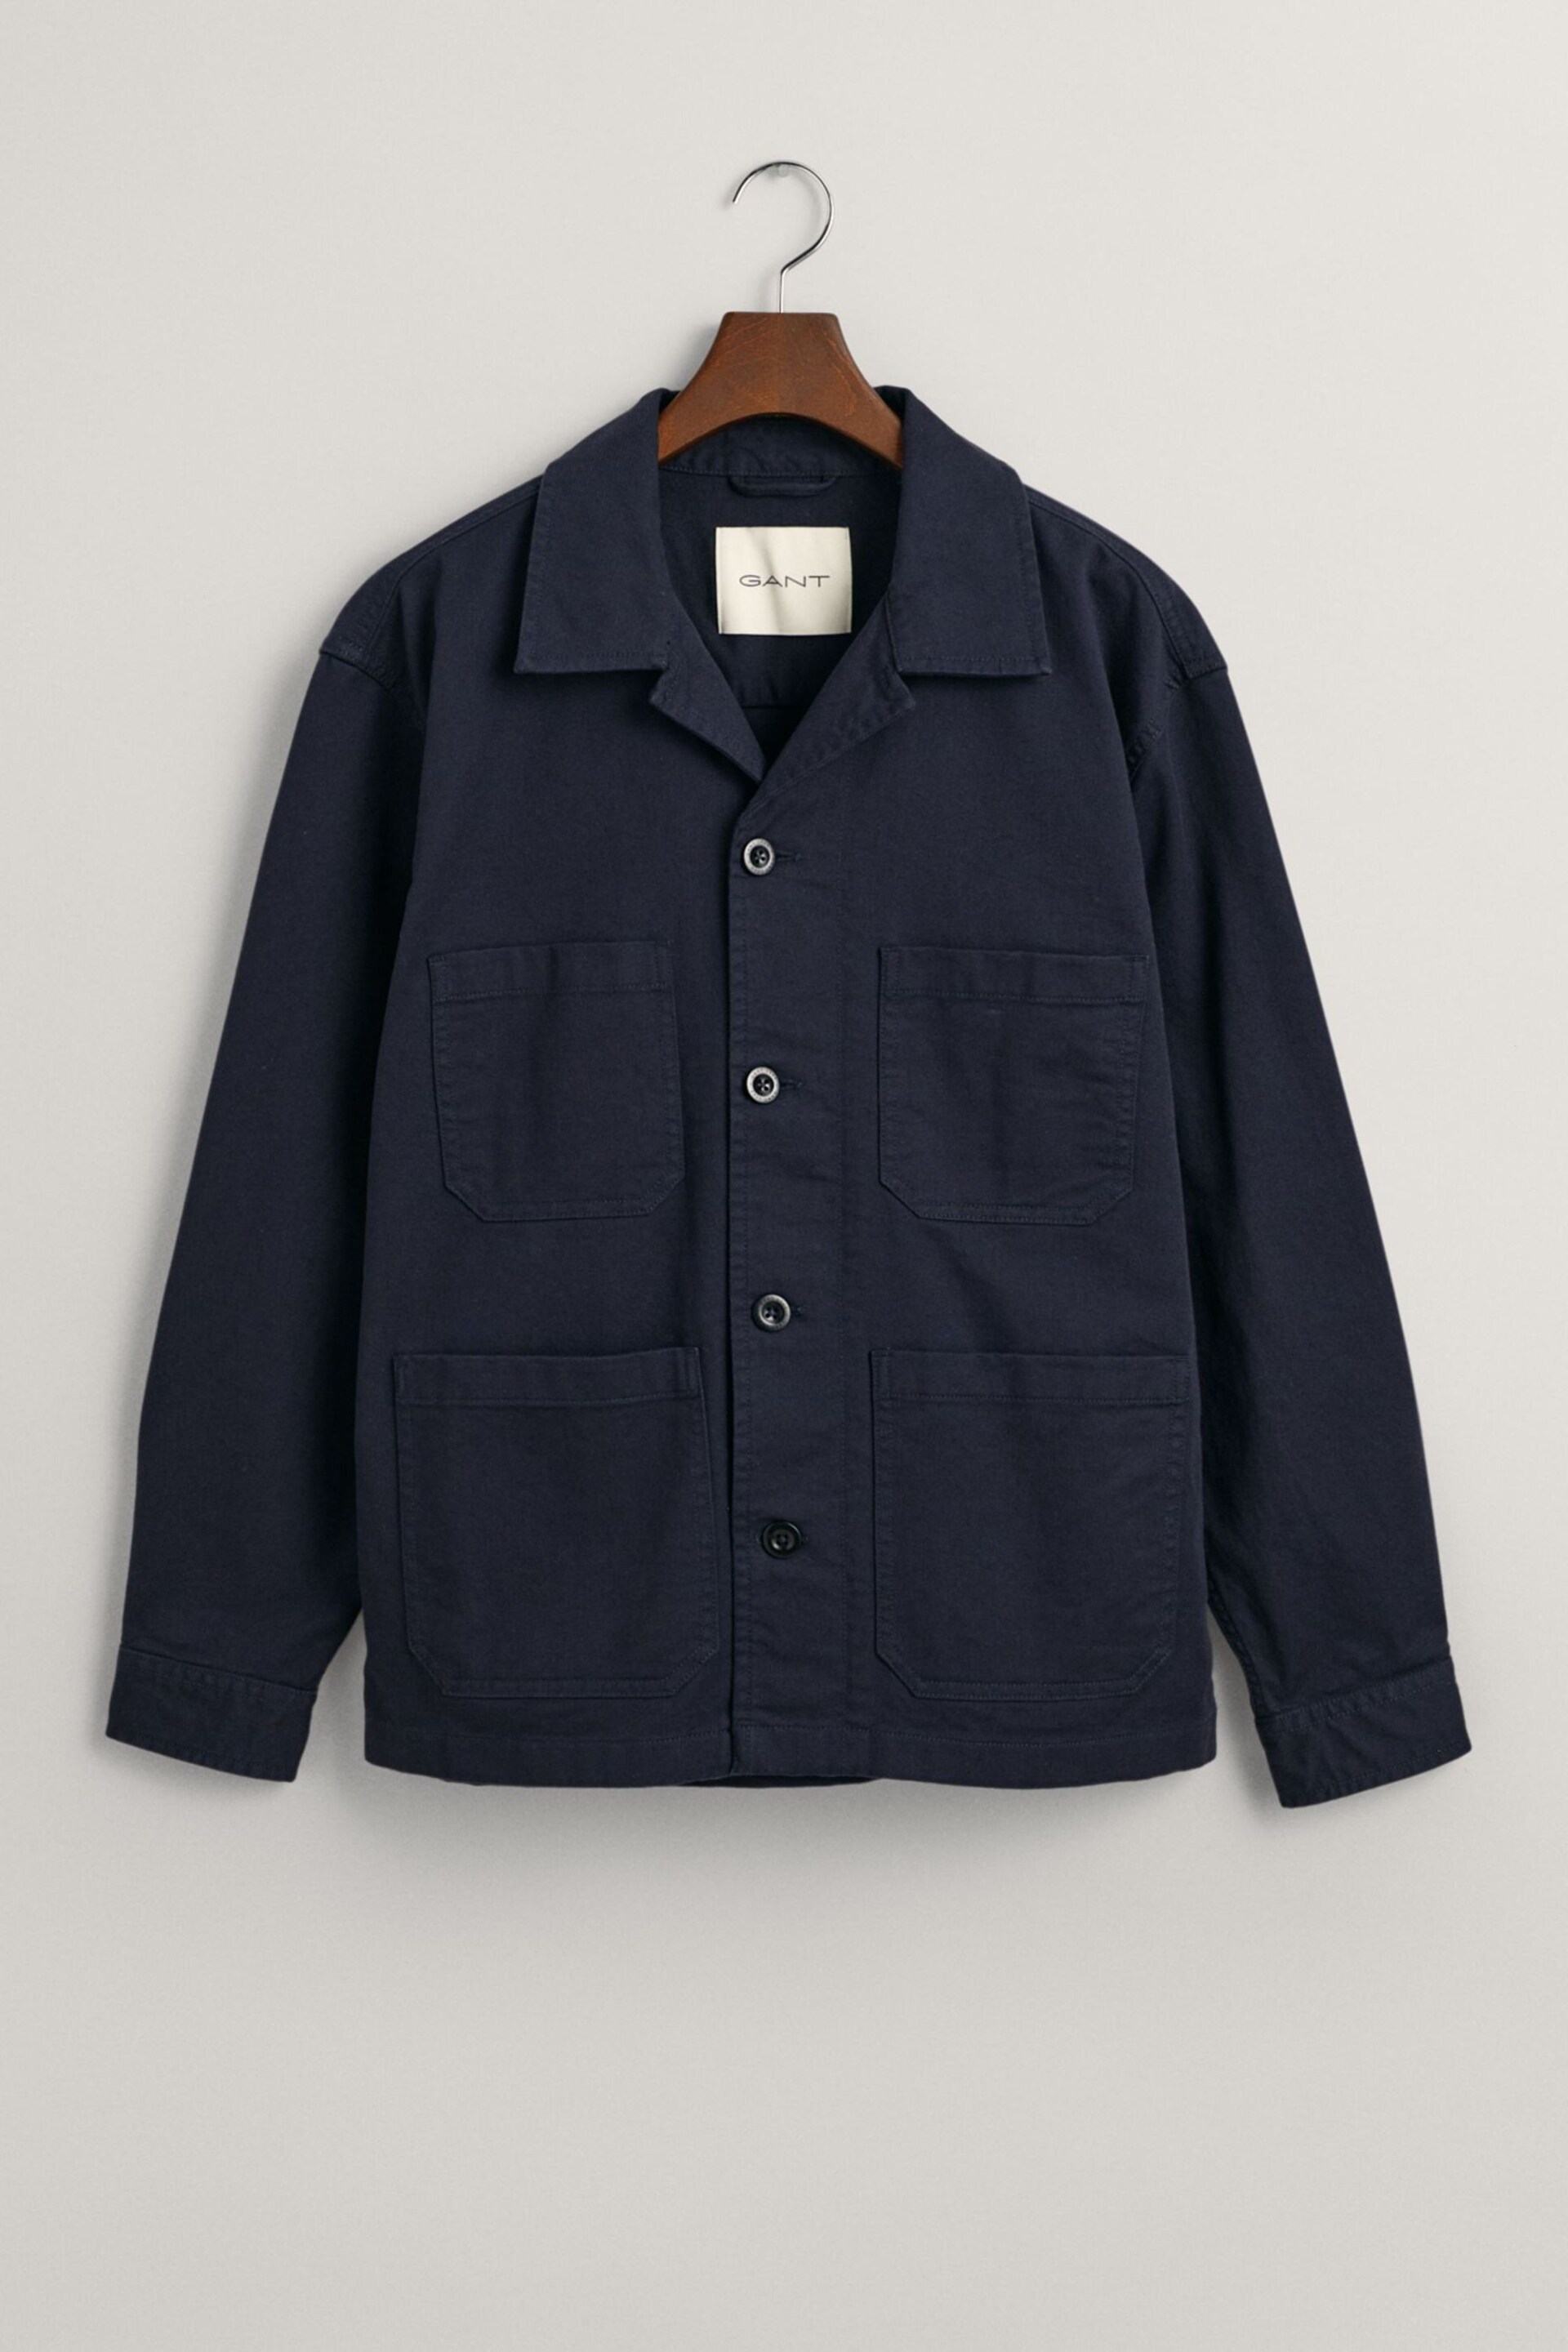 GANT Blue Relaxed Fit Cotton Linen Twill Overshirt - Image 7 of 7